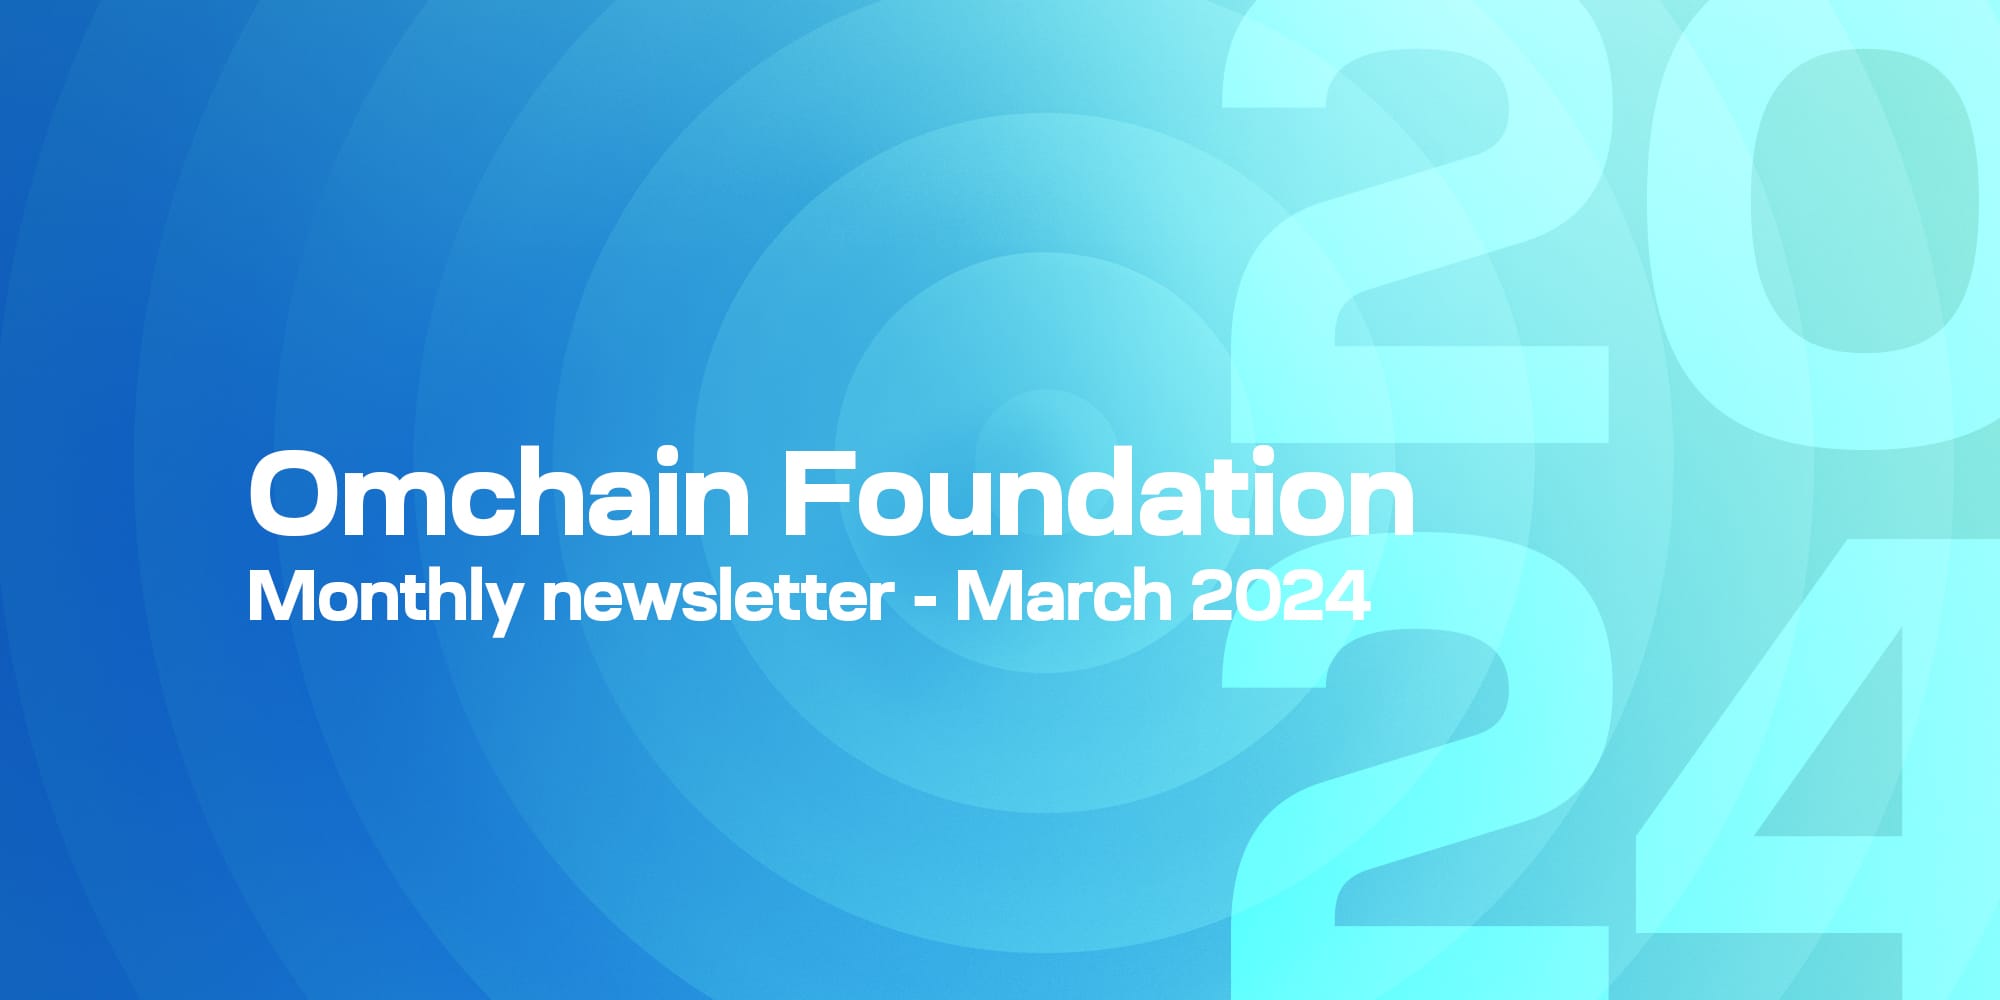 Omchain Foundation - Monthly Newsletter - March 2024